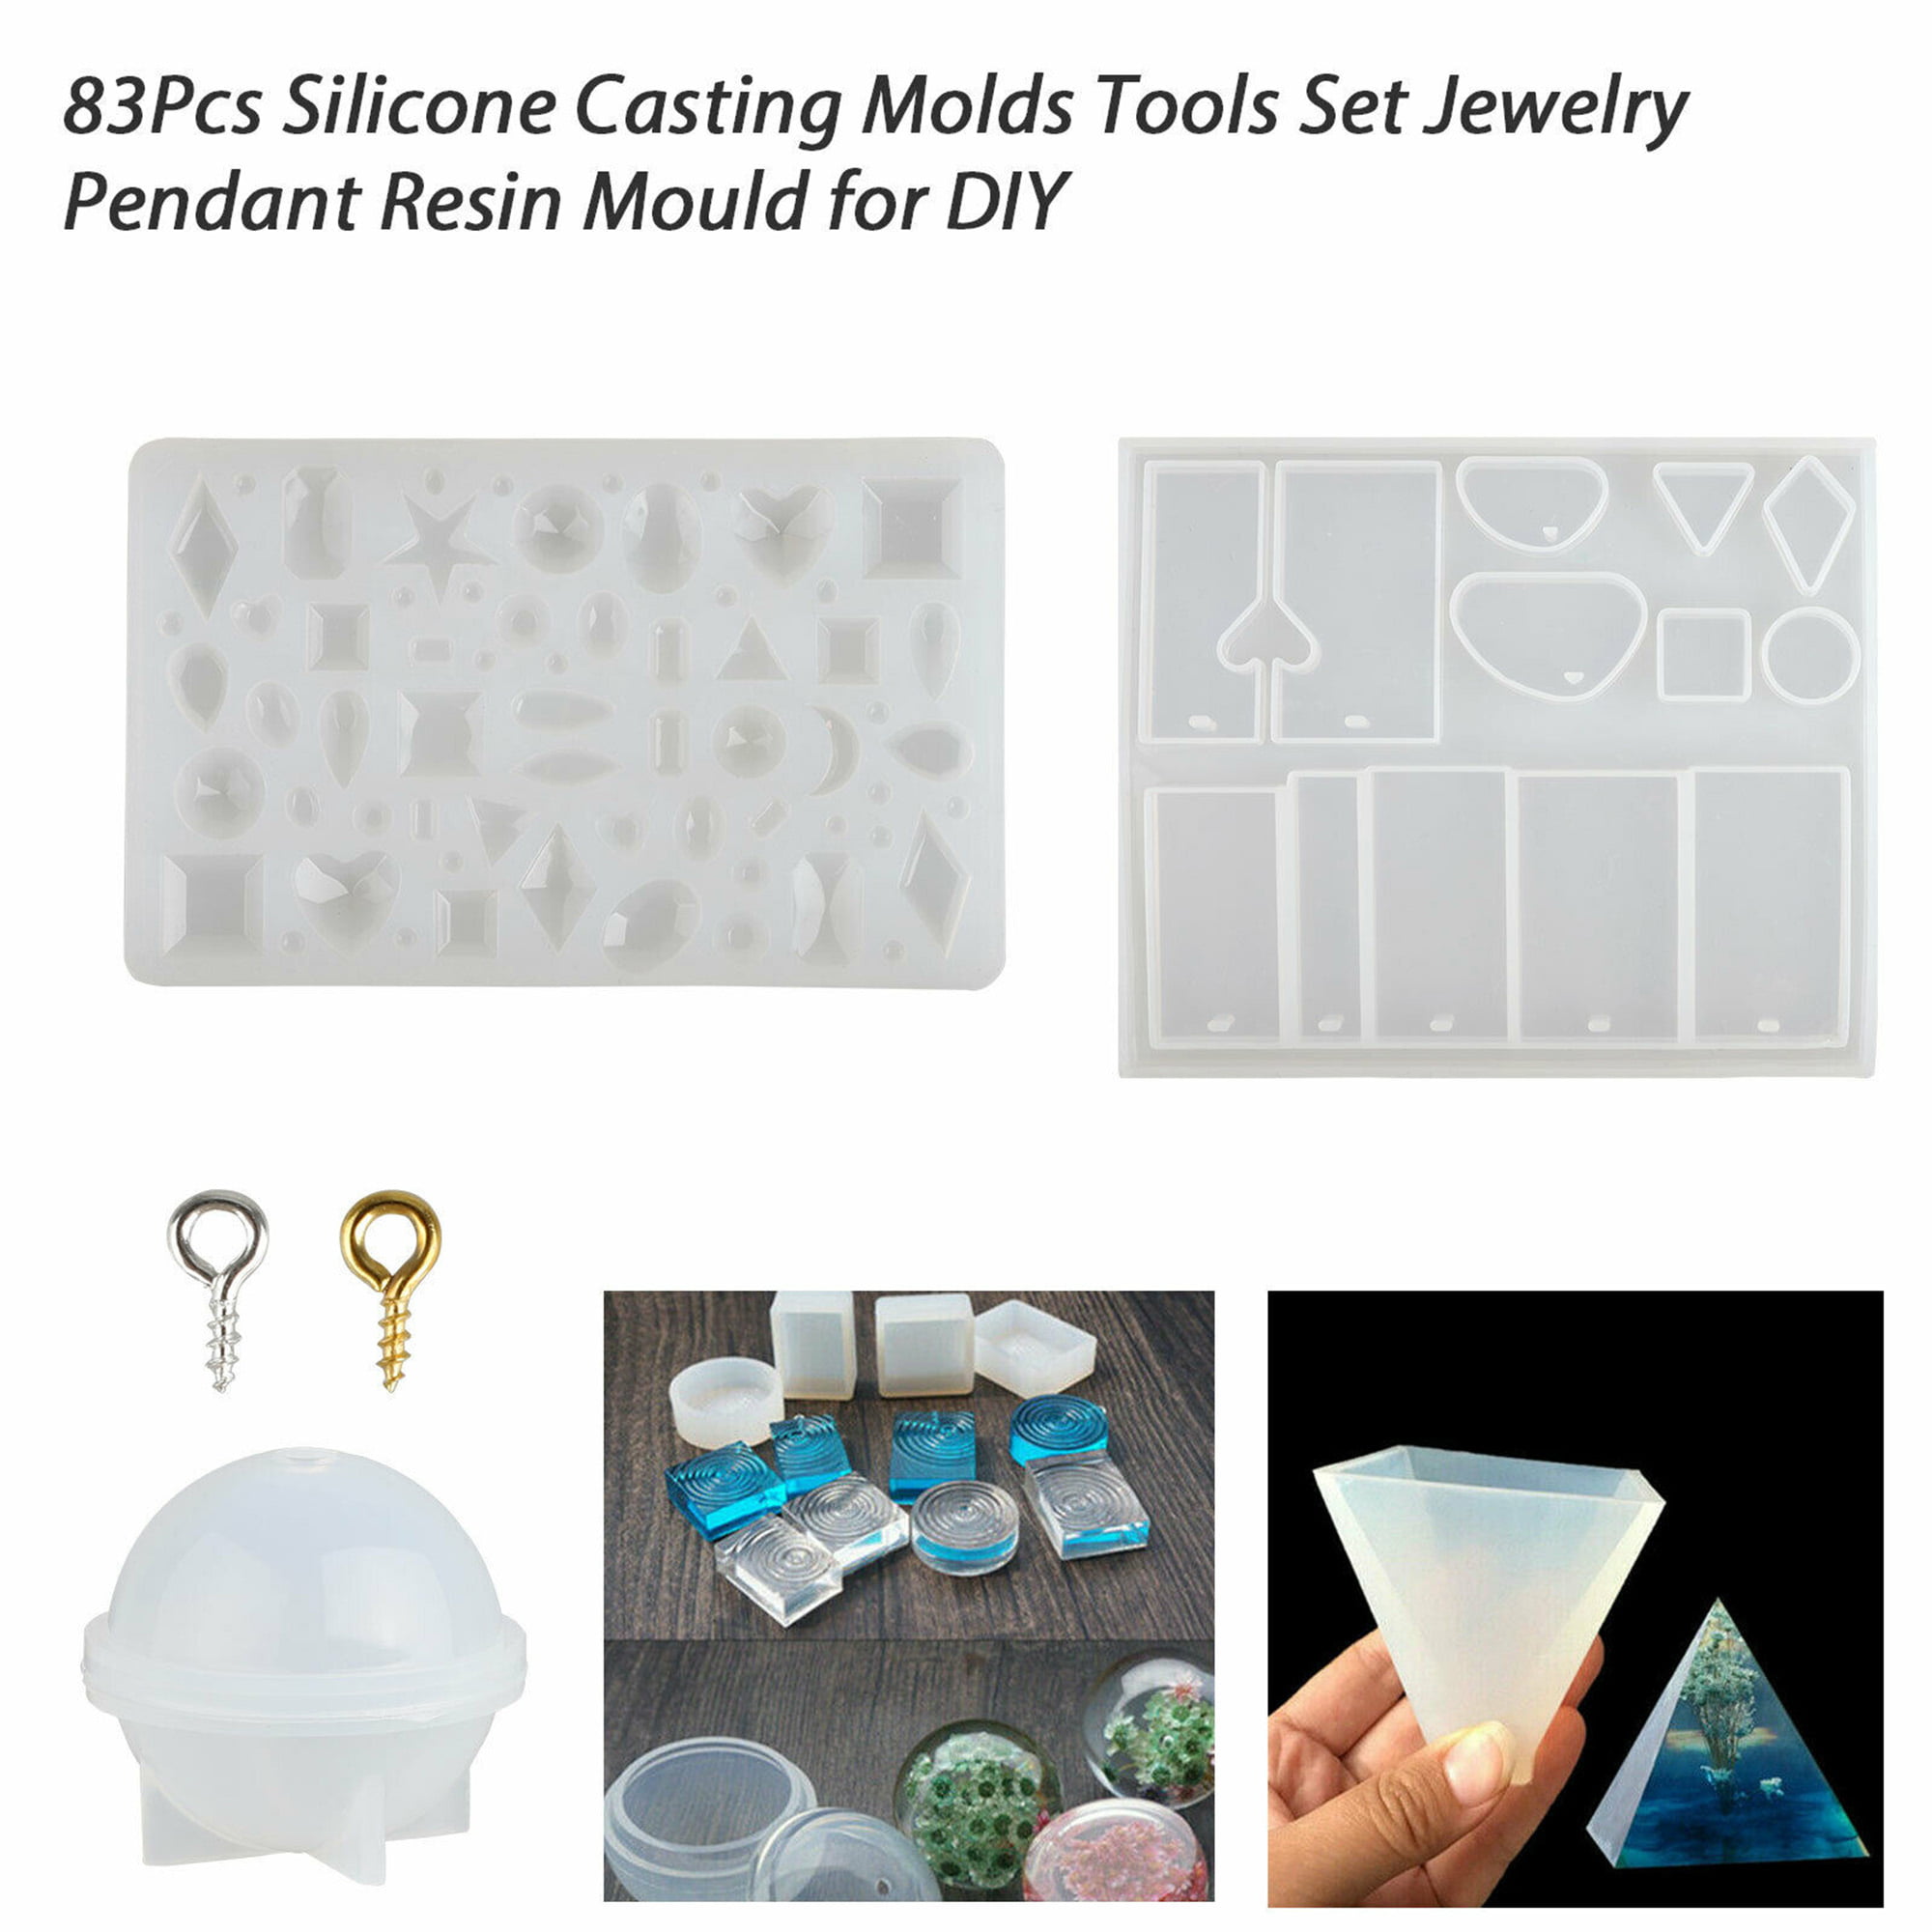 ALINREDBX Resin Silicone Molds 18Pcs Silicone Molds Kit with 6pcs Casting  Mold Includes Cube, Sphere, Pyramid, Coaster Shapes, Pendants 2 Measuring